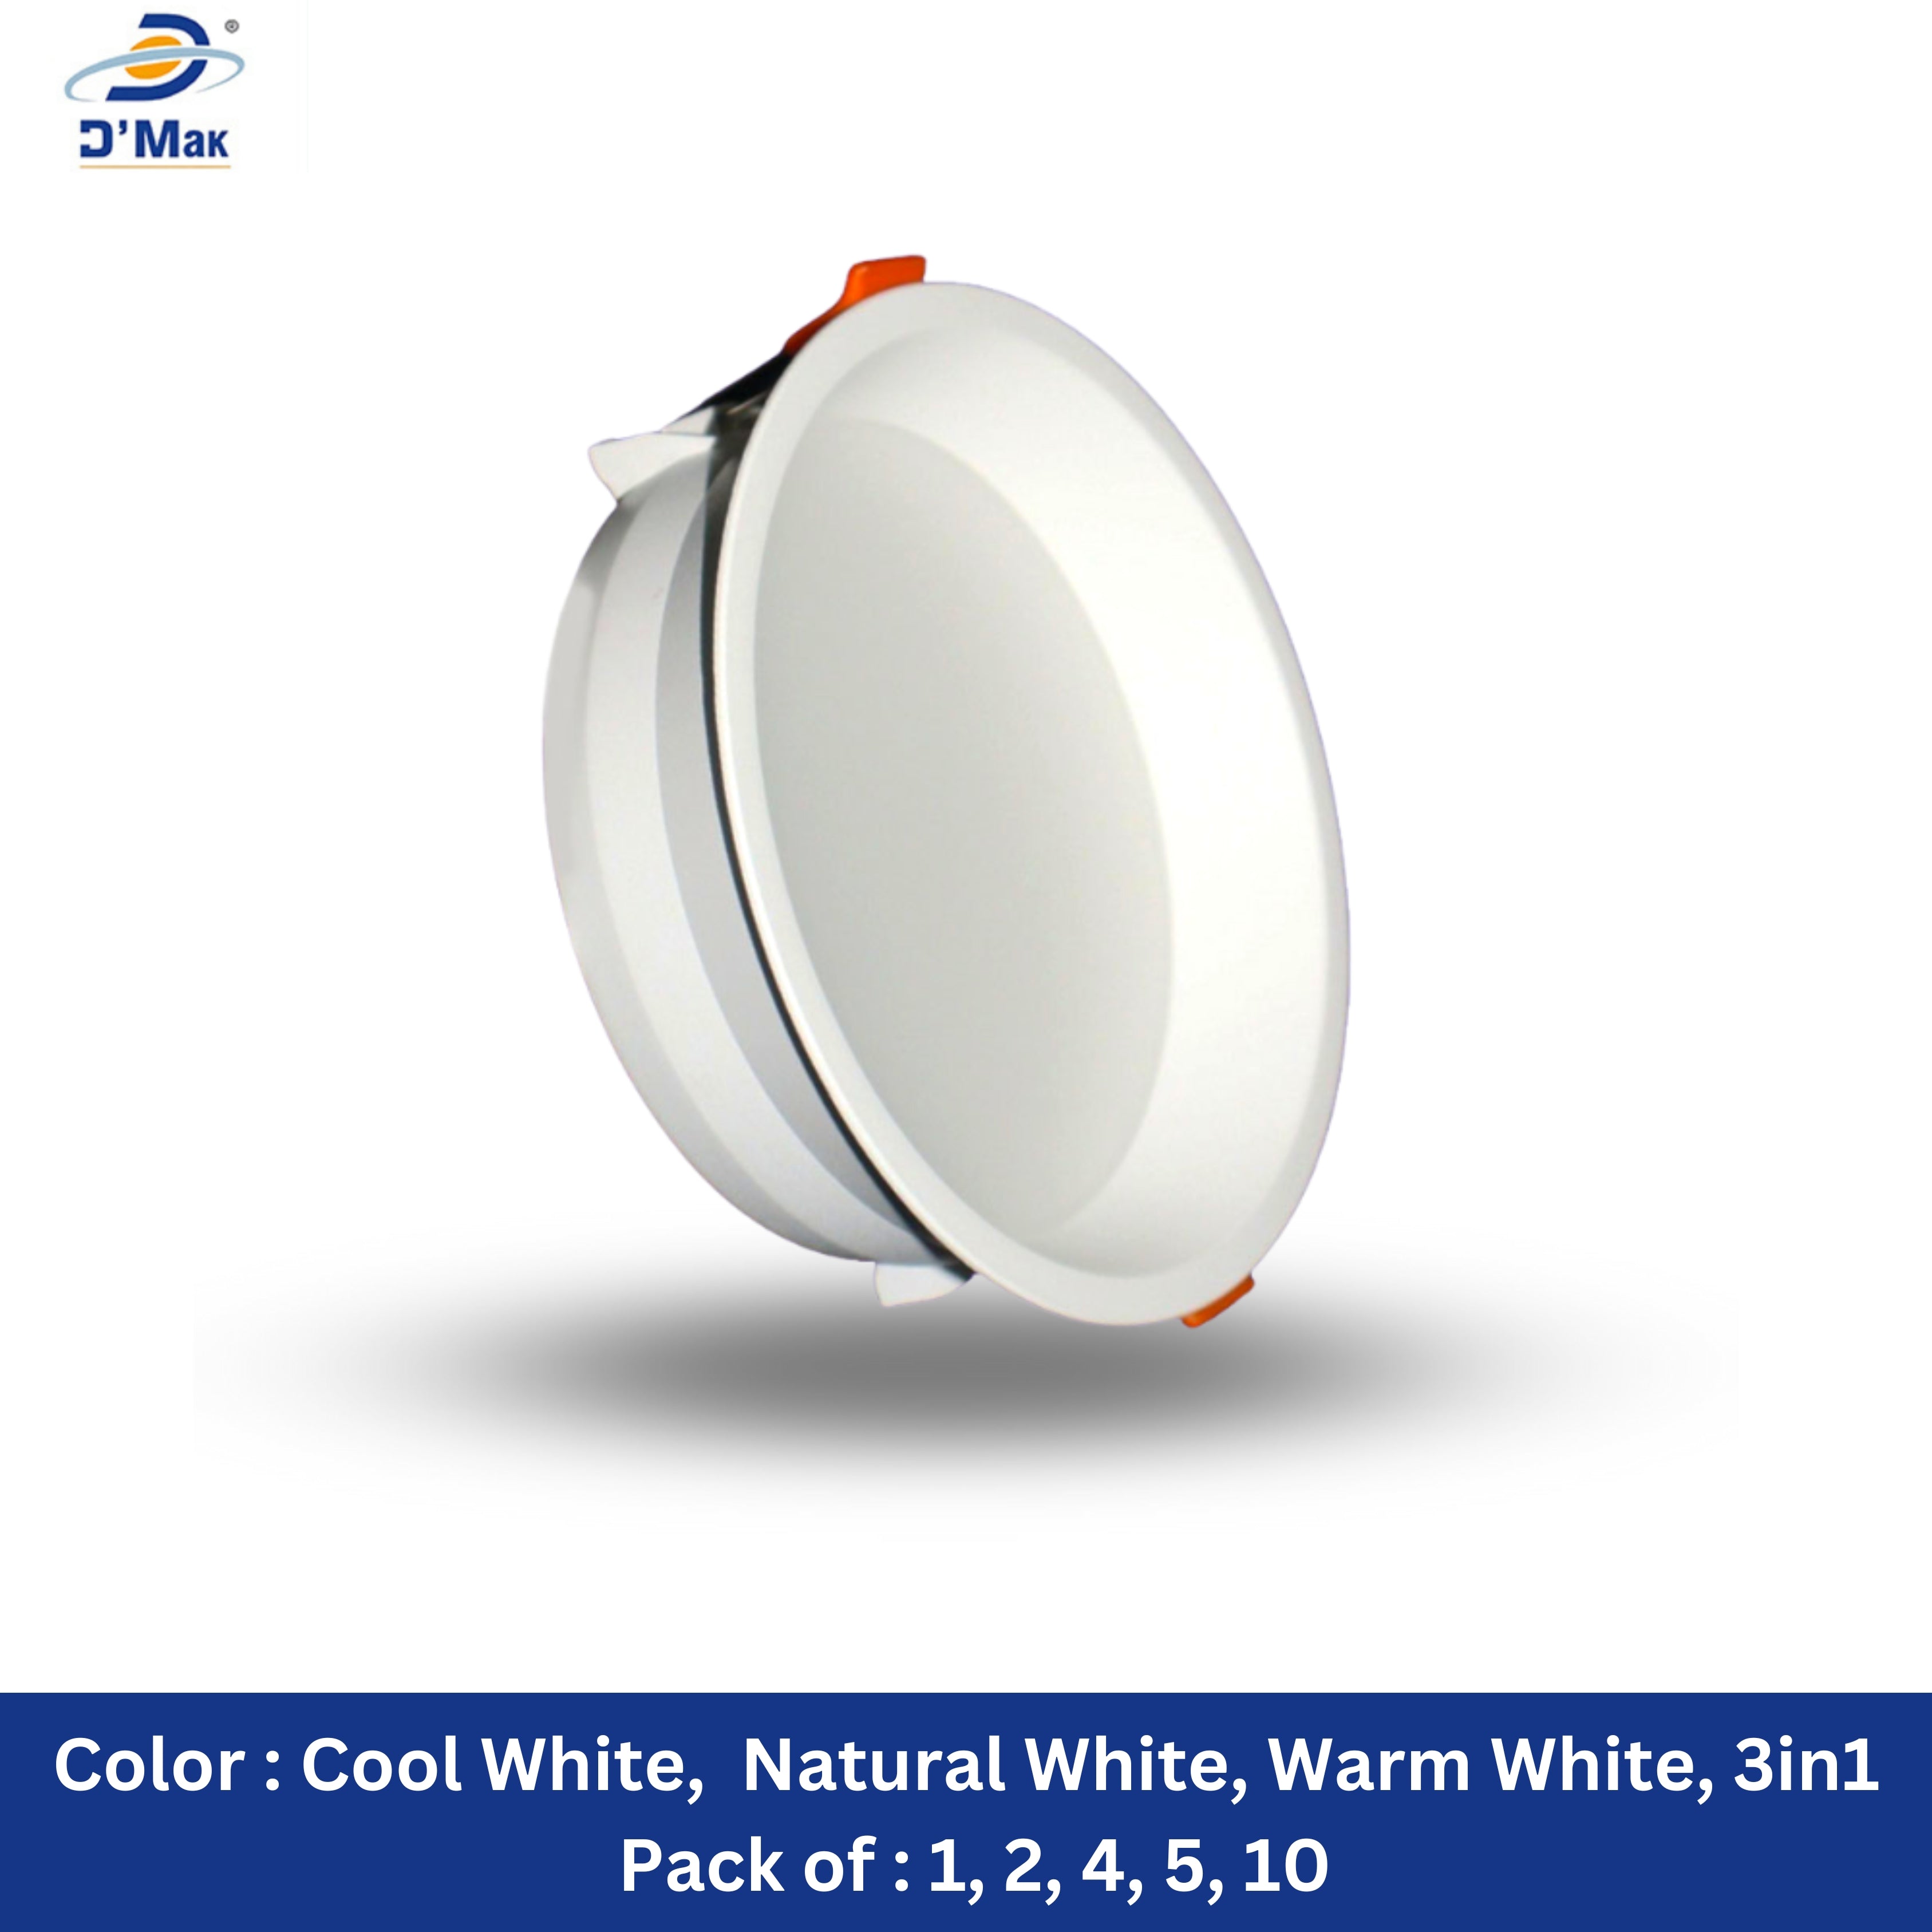 15 Watt Round Deep Down PC (Poly Carbonate) Panel Light in White Body for POP / Recessed Lighting